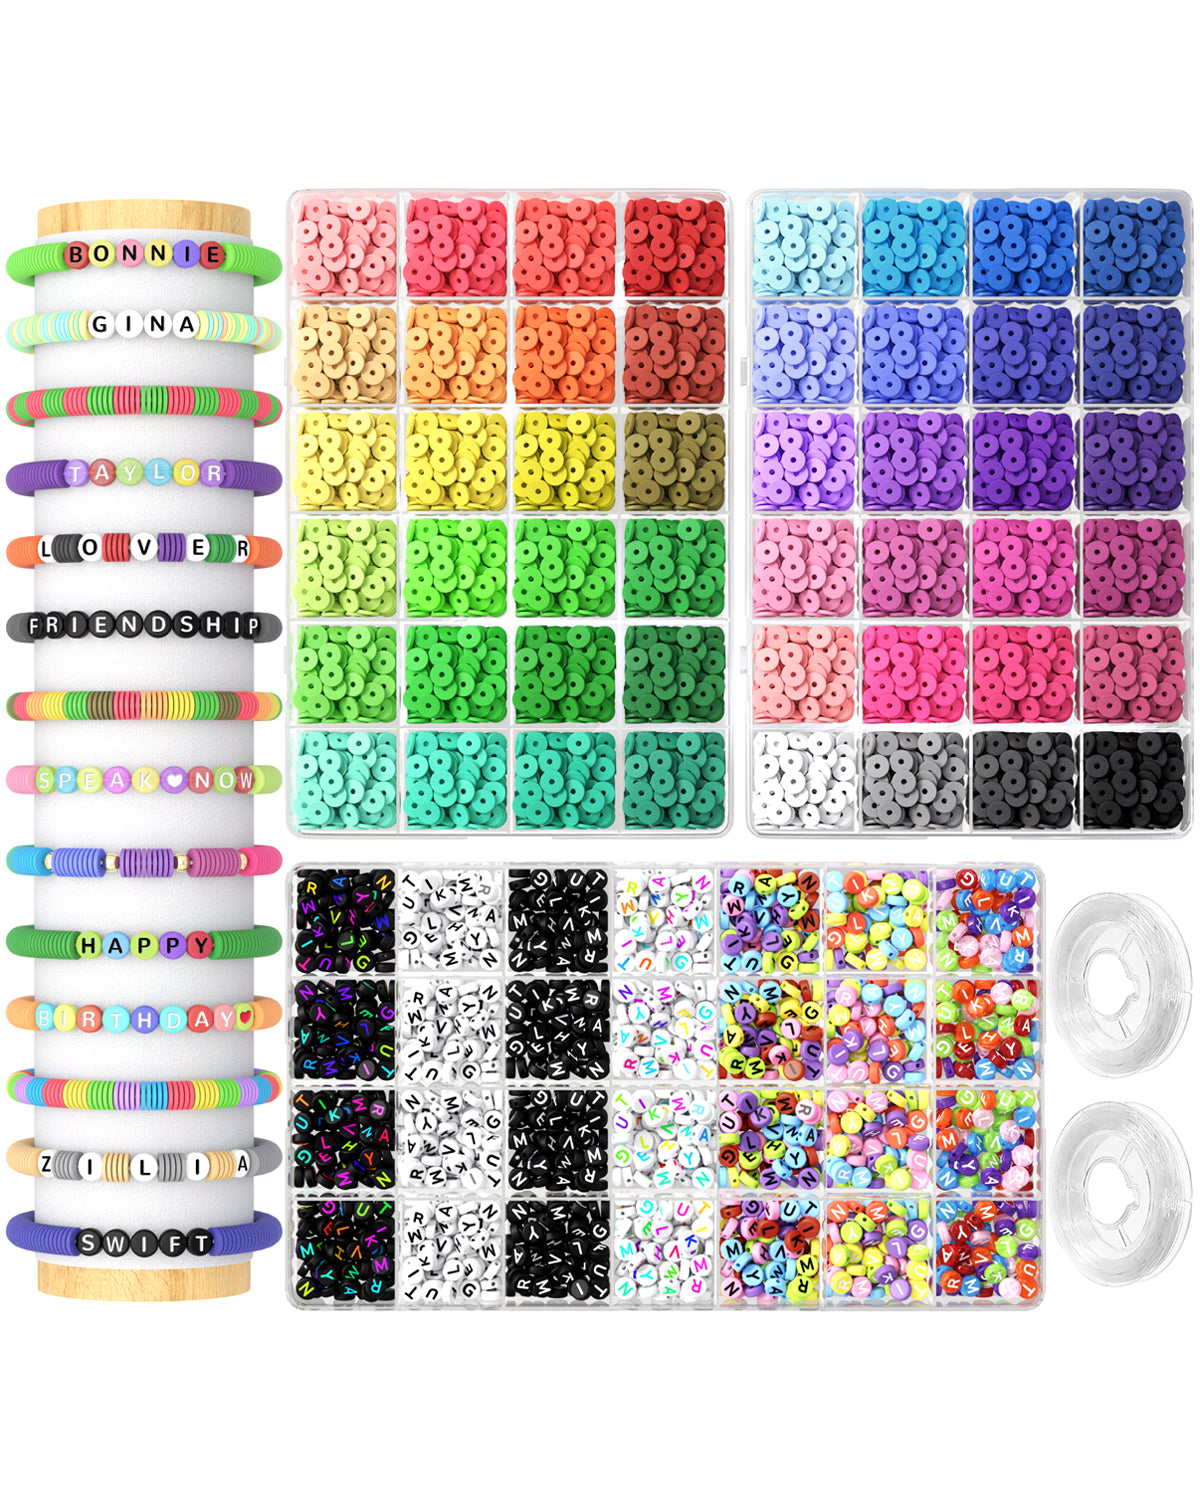 ARTDOT Diamond Painting Accessories, 445000 Pieces 445 Colors Square Beads for Diamond Art Kits Crafts Adults